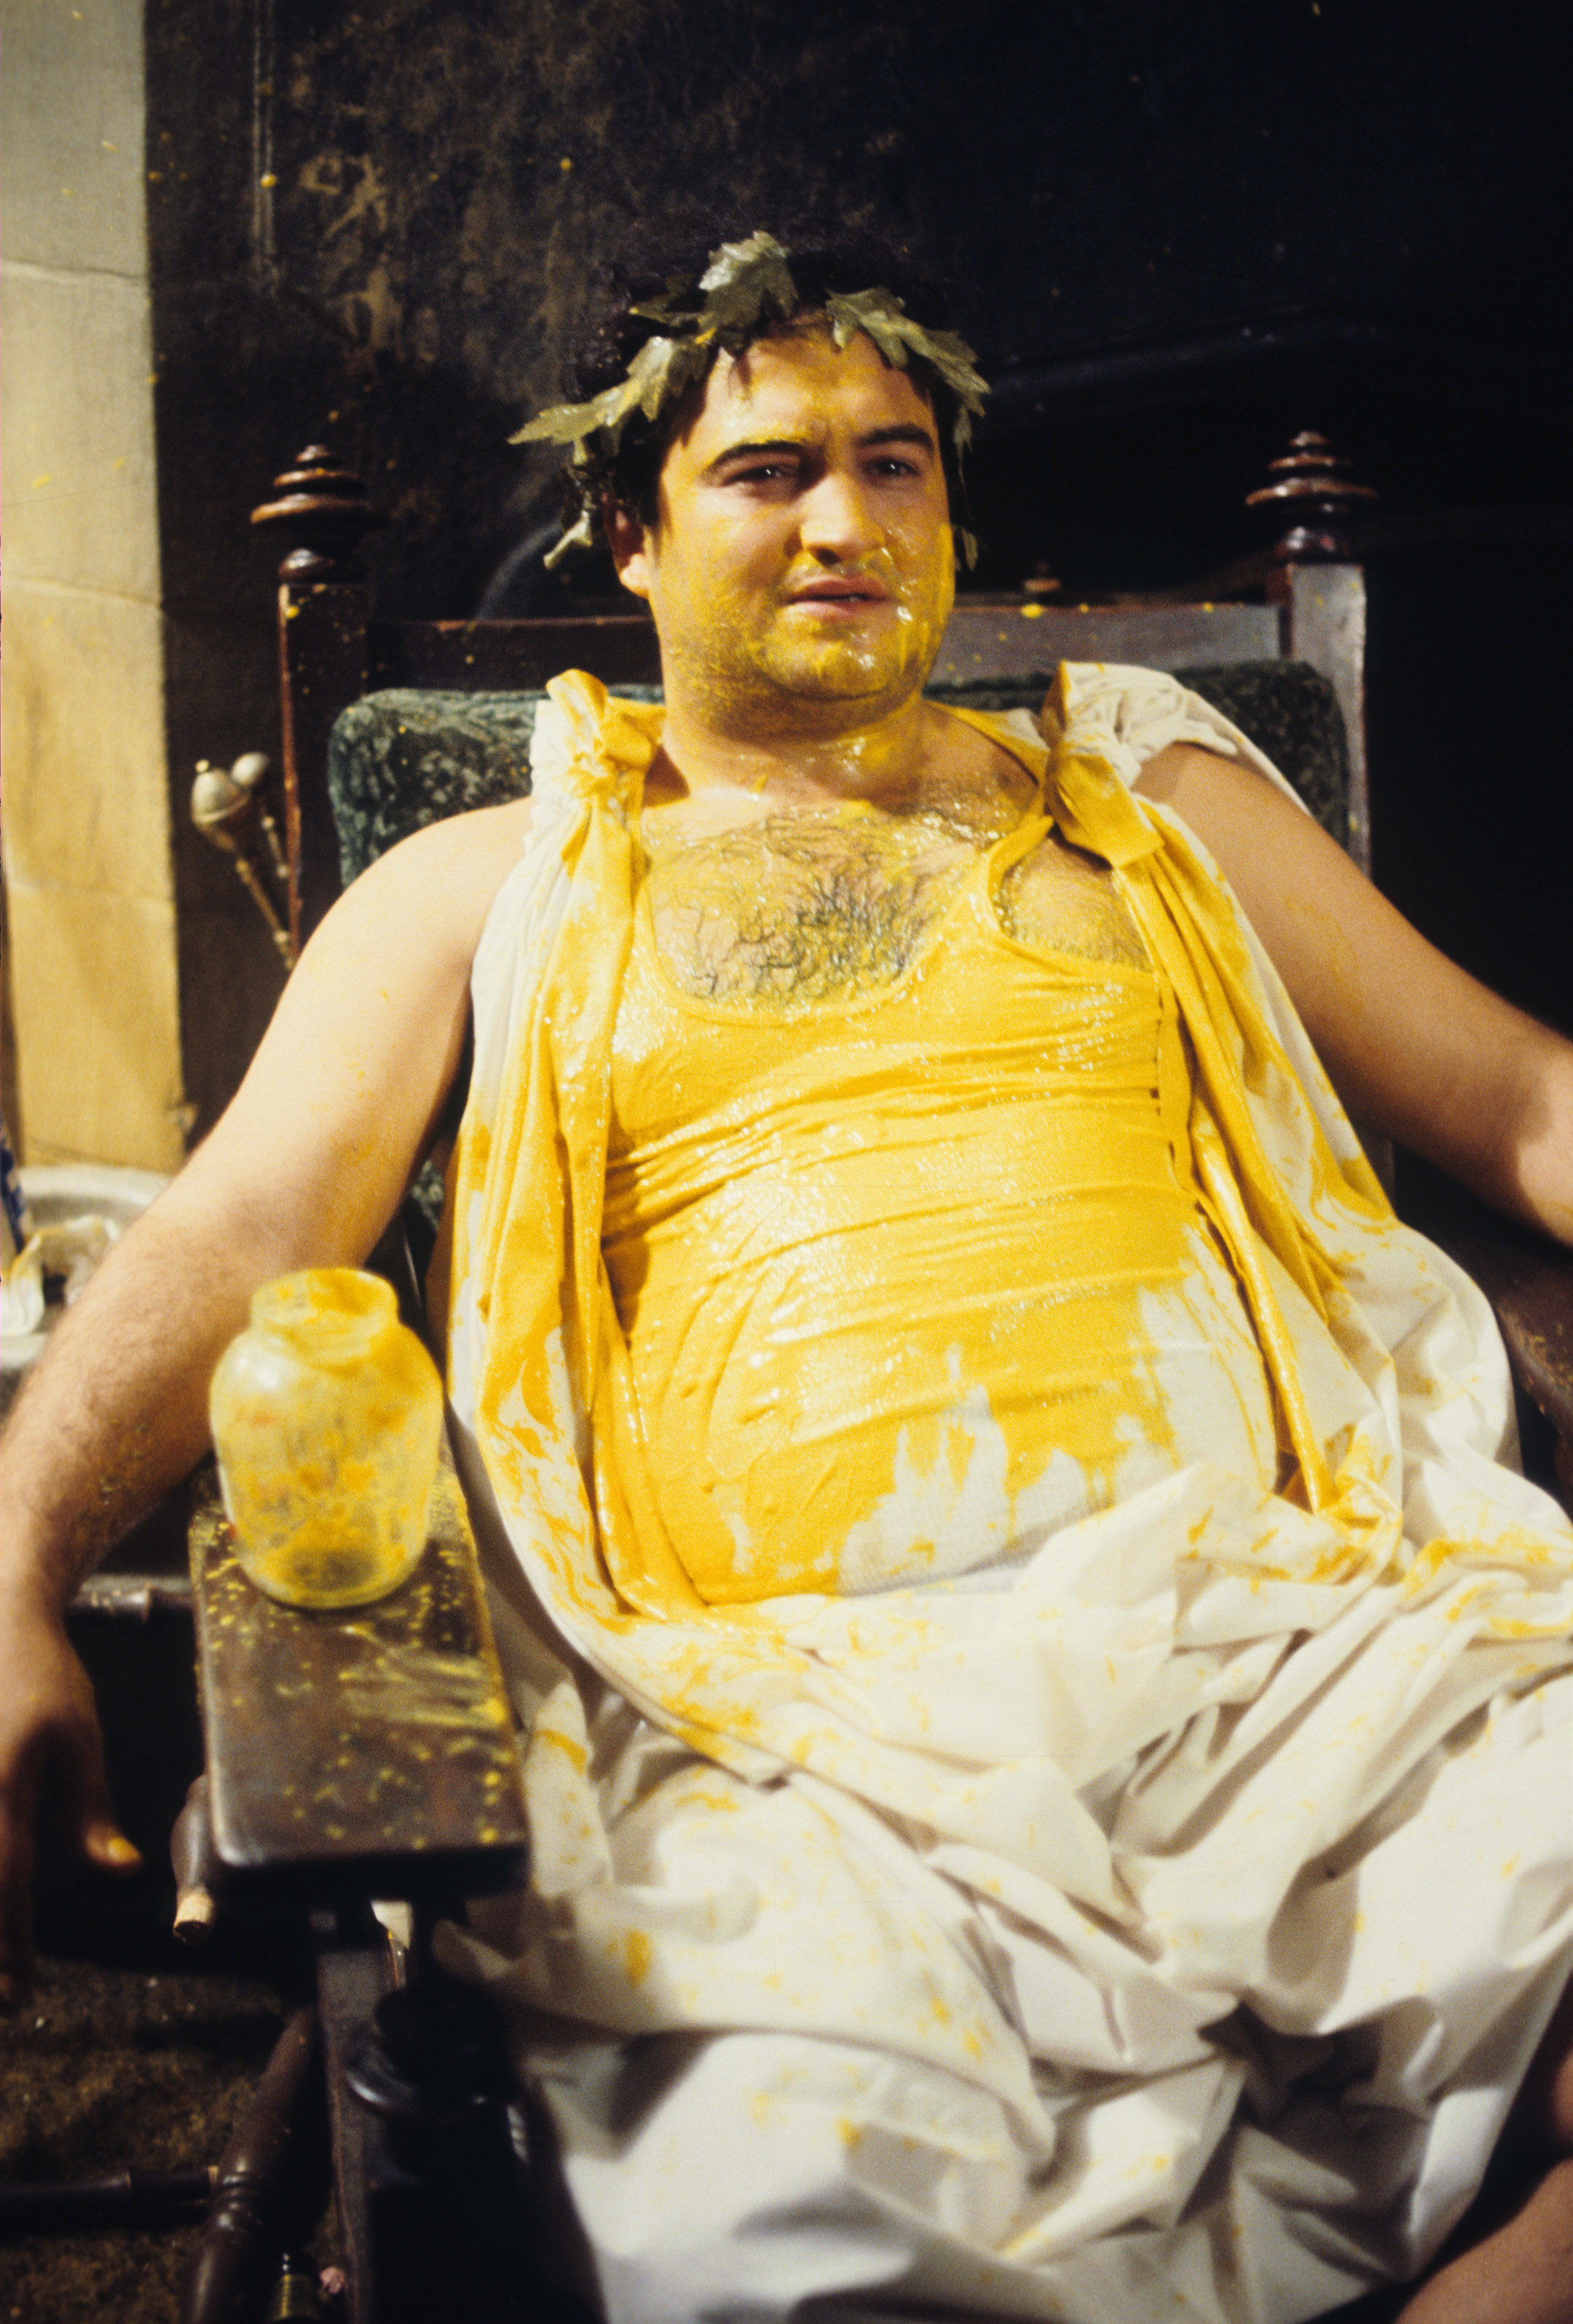 man in a toga covered in yellow liquid